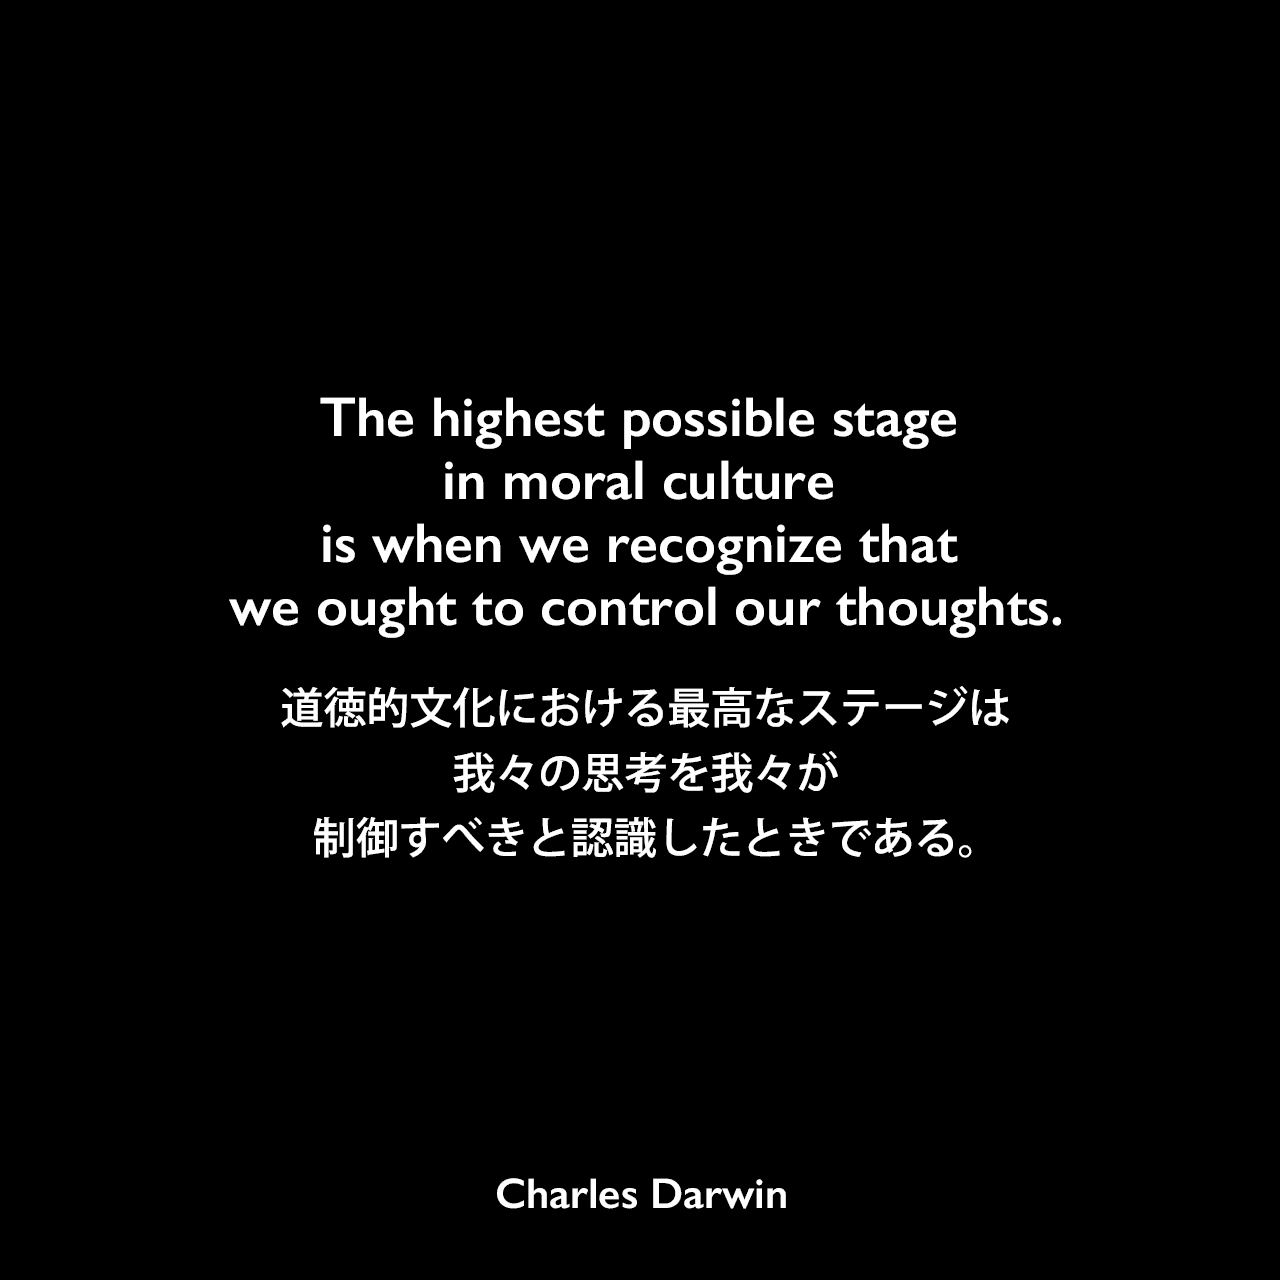 The highest possible stage in moral culture is when we recognize that we ought to control our thoughts.道徳的文化における最高なステージは、我々の思考を我々が制御すべきと認識したときである。- ダーウィンの本「人間の進化と性淘汰」よりCharles Darwin